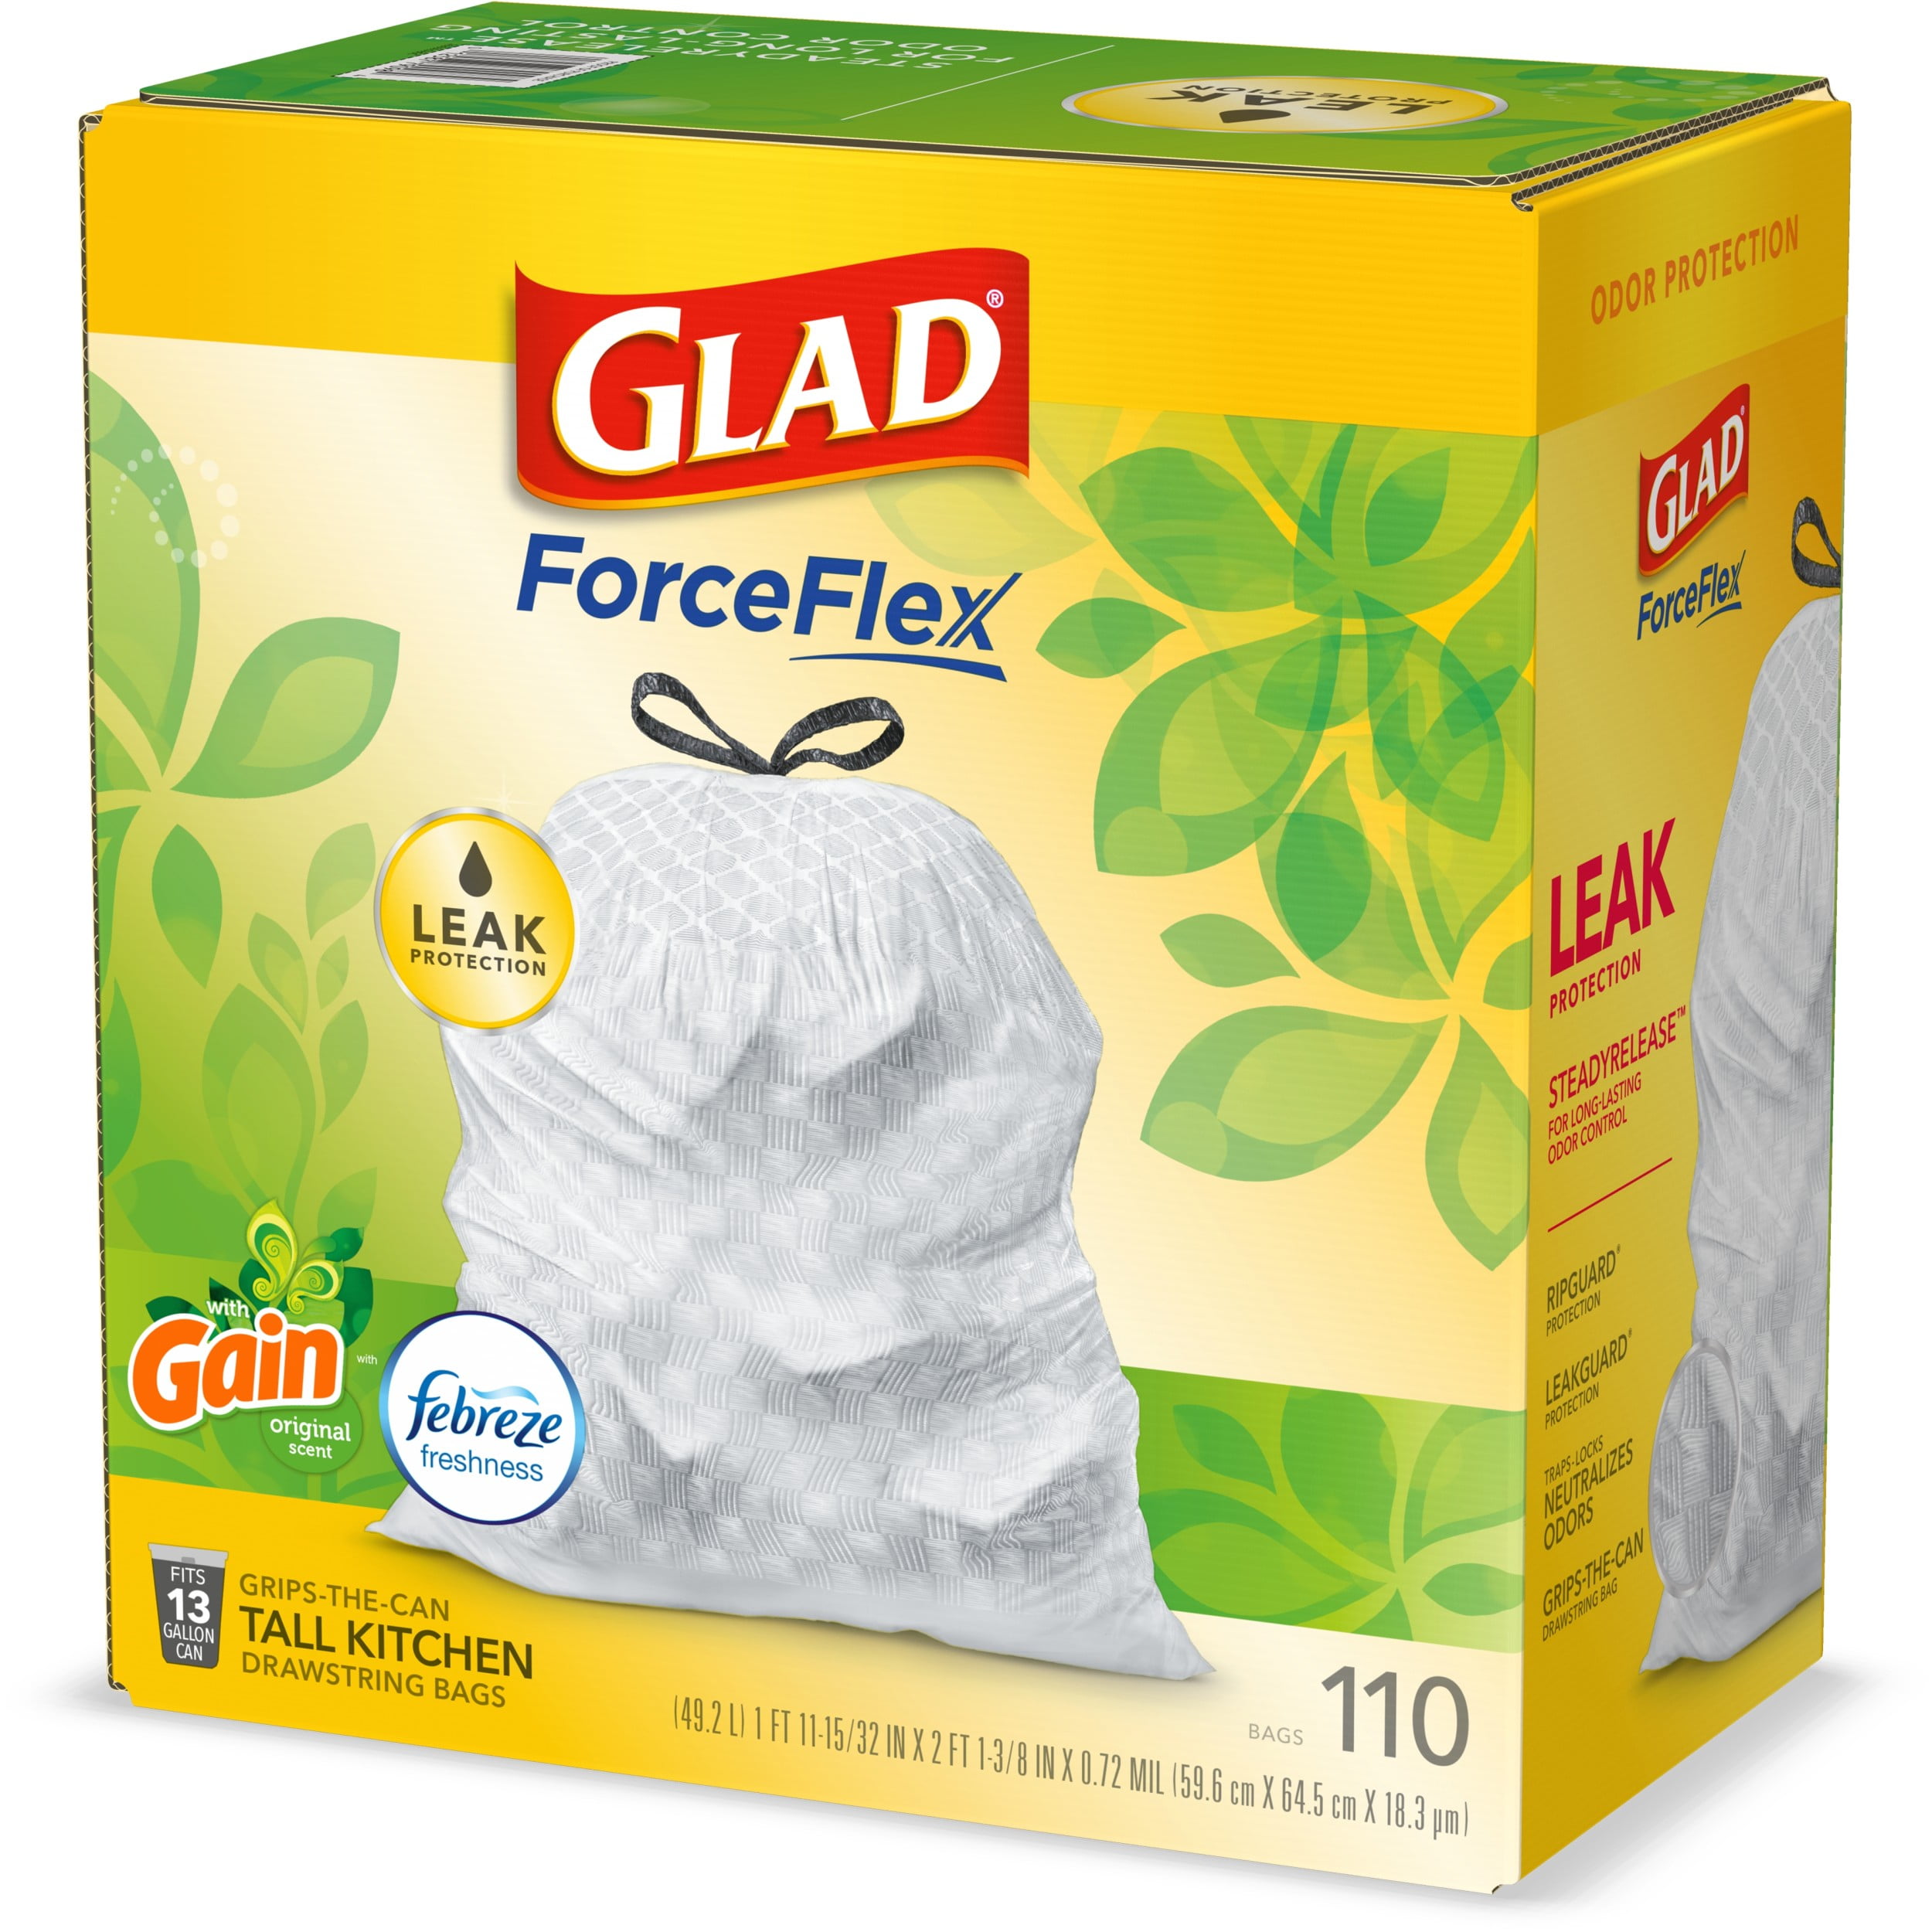 Save on Glad ForceFlex Tall Kitchen Drawstring Bags Gain Original 13 Gallon  Order Online Delivery